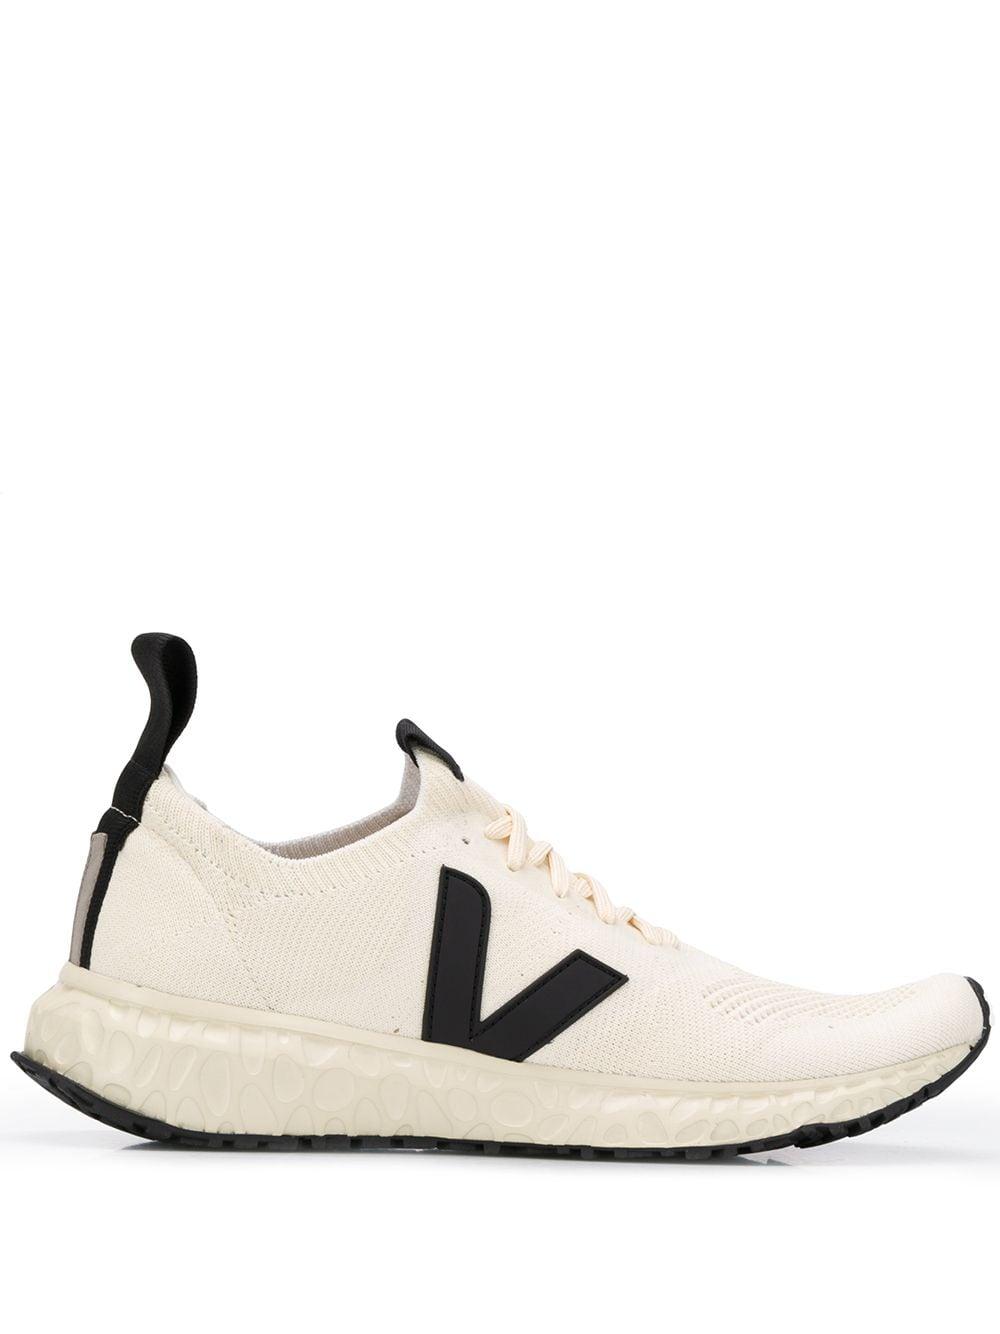 RICK OWENS VEJA Leather Veja Sneakers in White for Men - Save 54% - Lyst